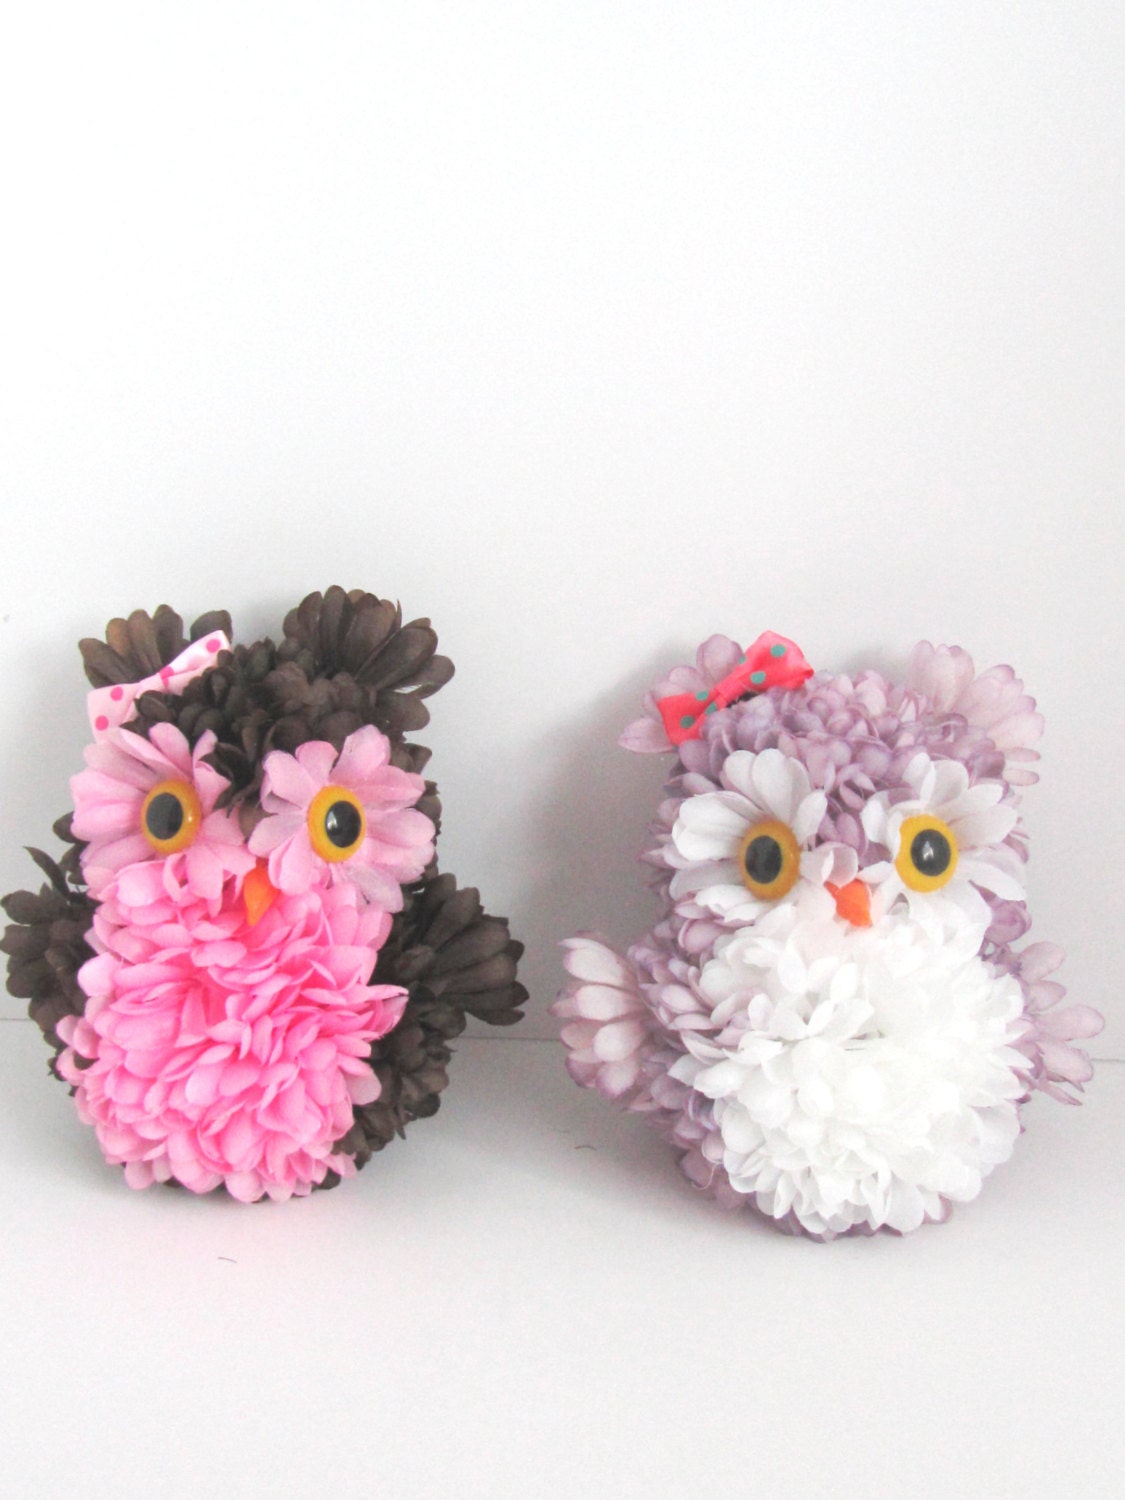 Owl Theme Decorations : Owl Baby Shower Decorations | Best Baby Decoration : Your banner should be designed according to your owl theme.